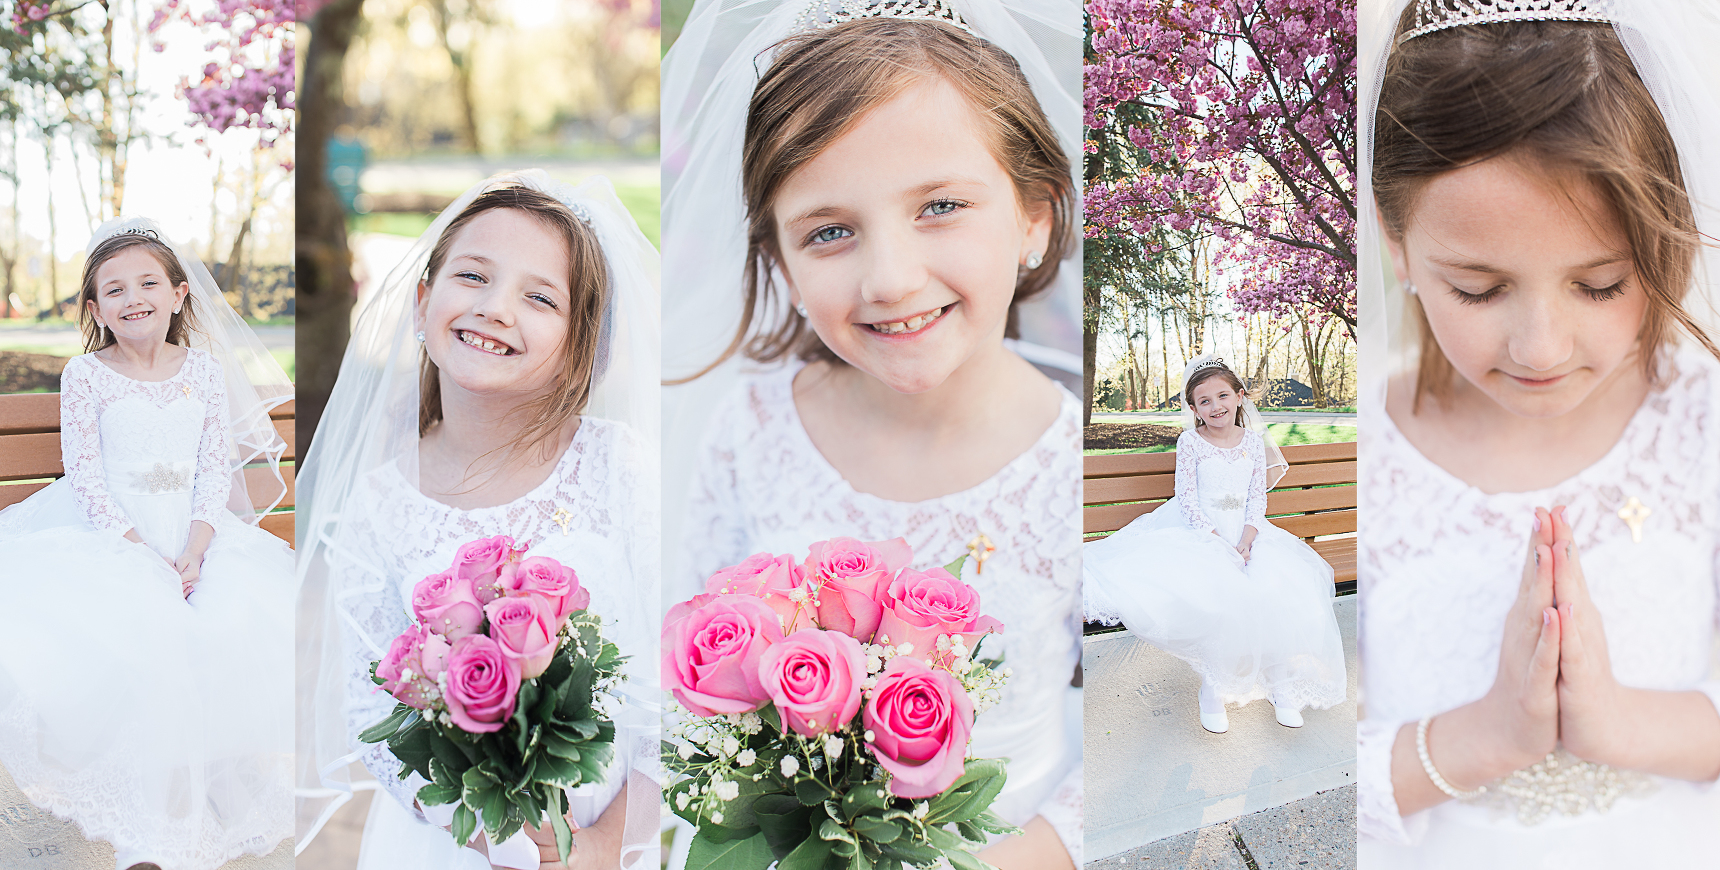 Other Holidays & First Communion Sessions - Magdalena Wojton